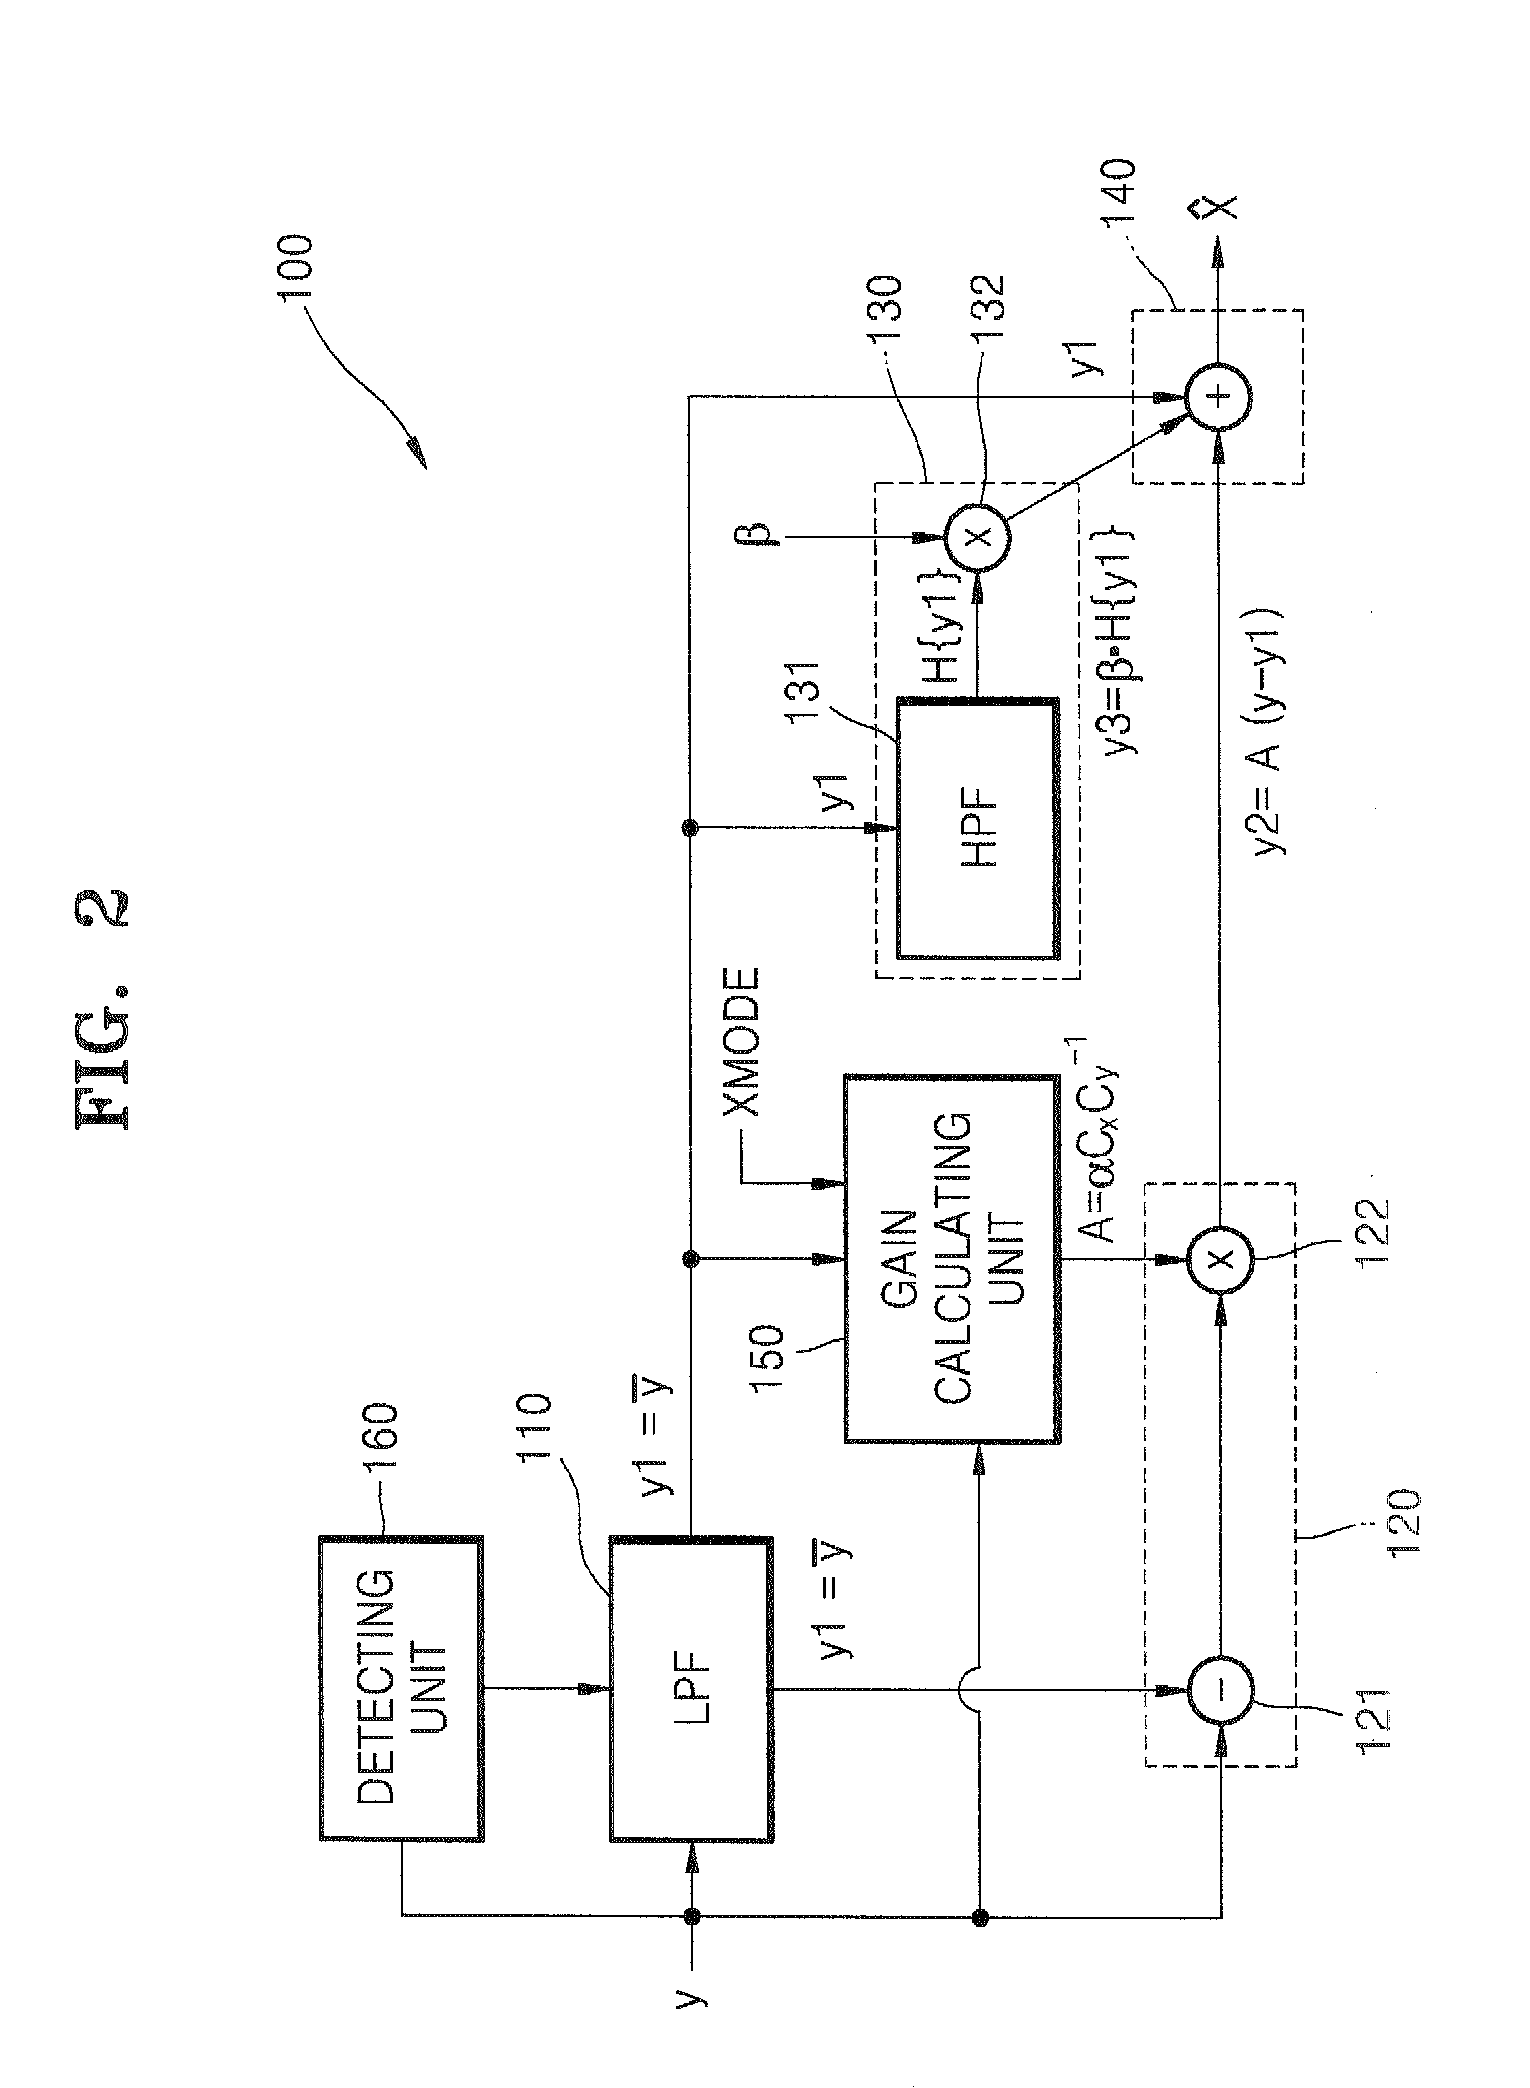 Post-processing circuit for processing an image signal according to frequency components of the image signal